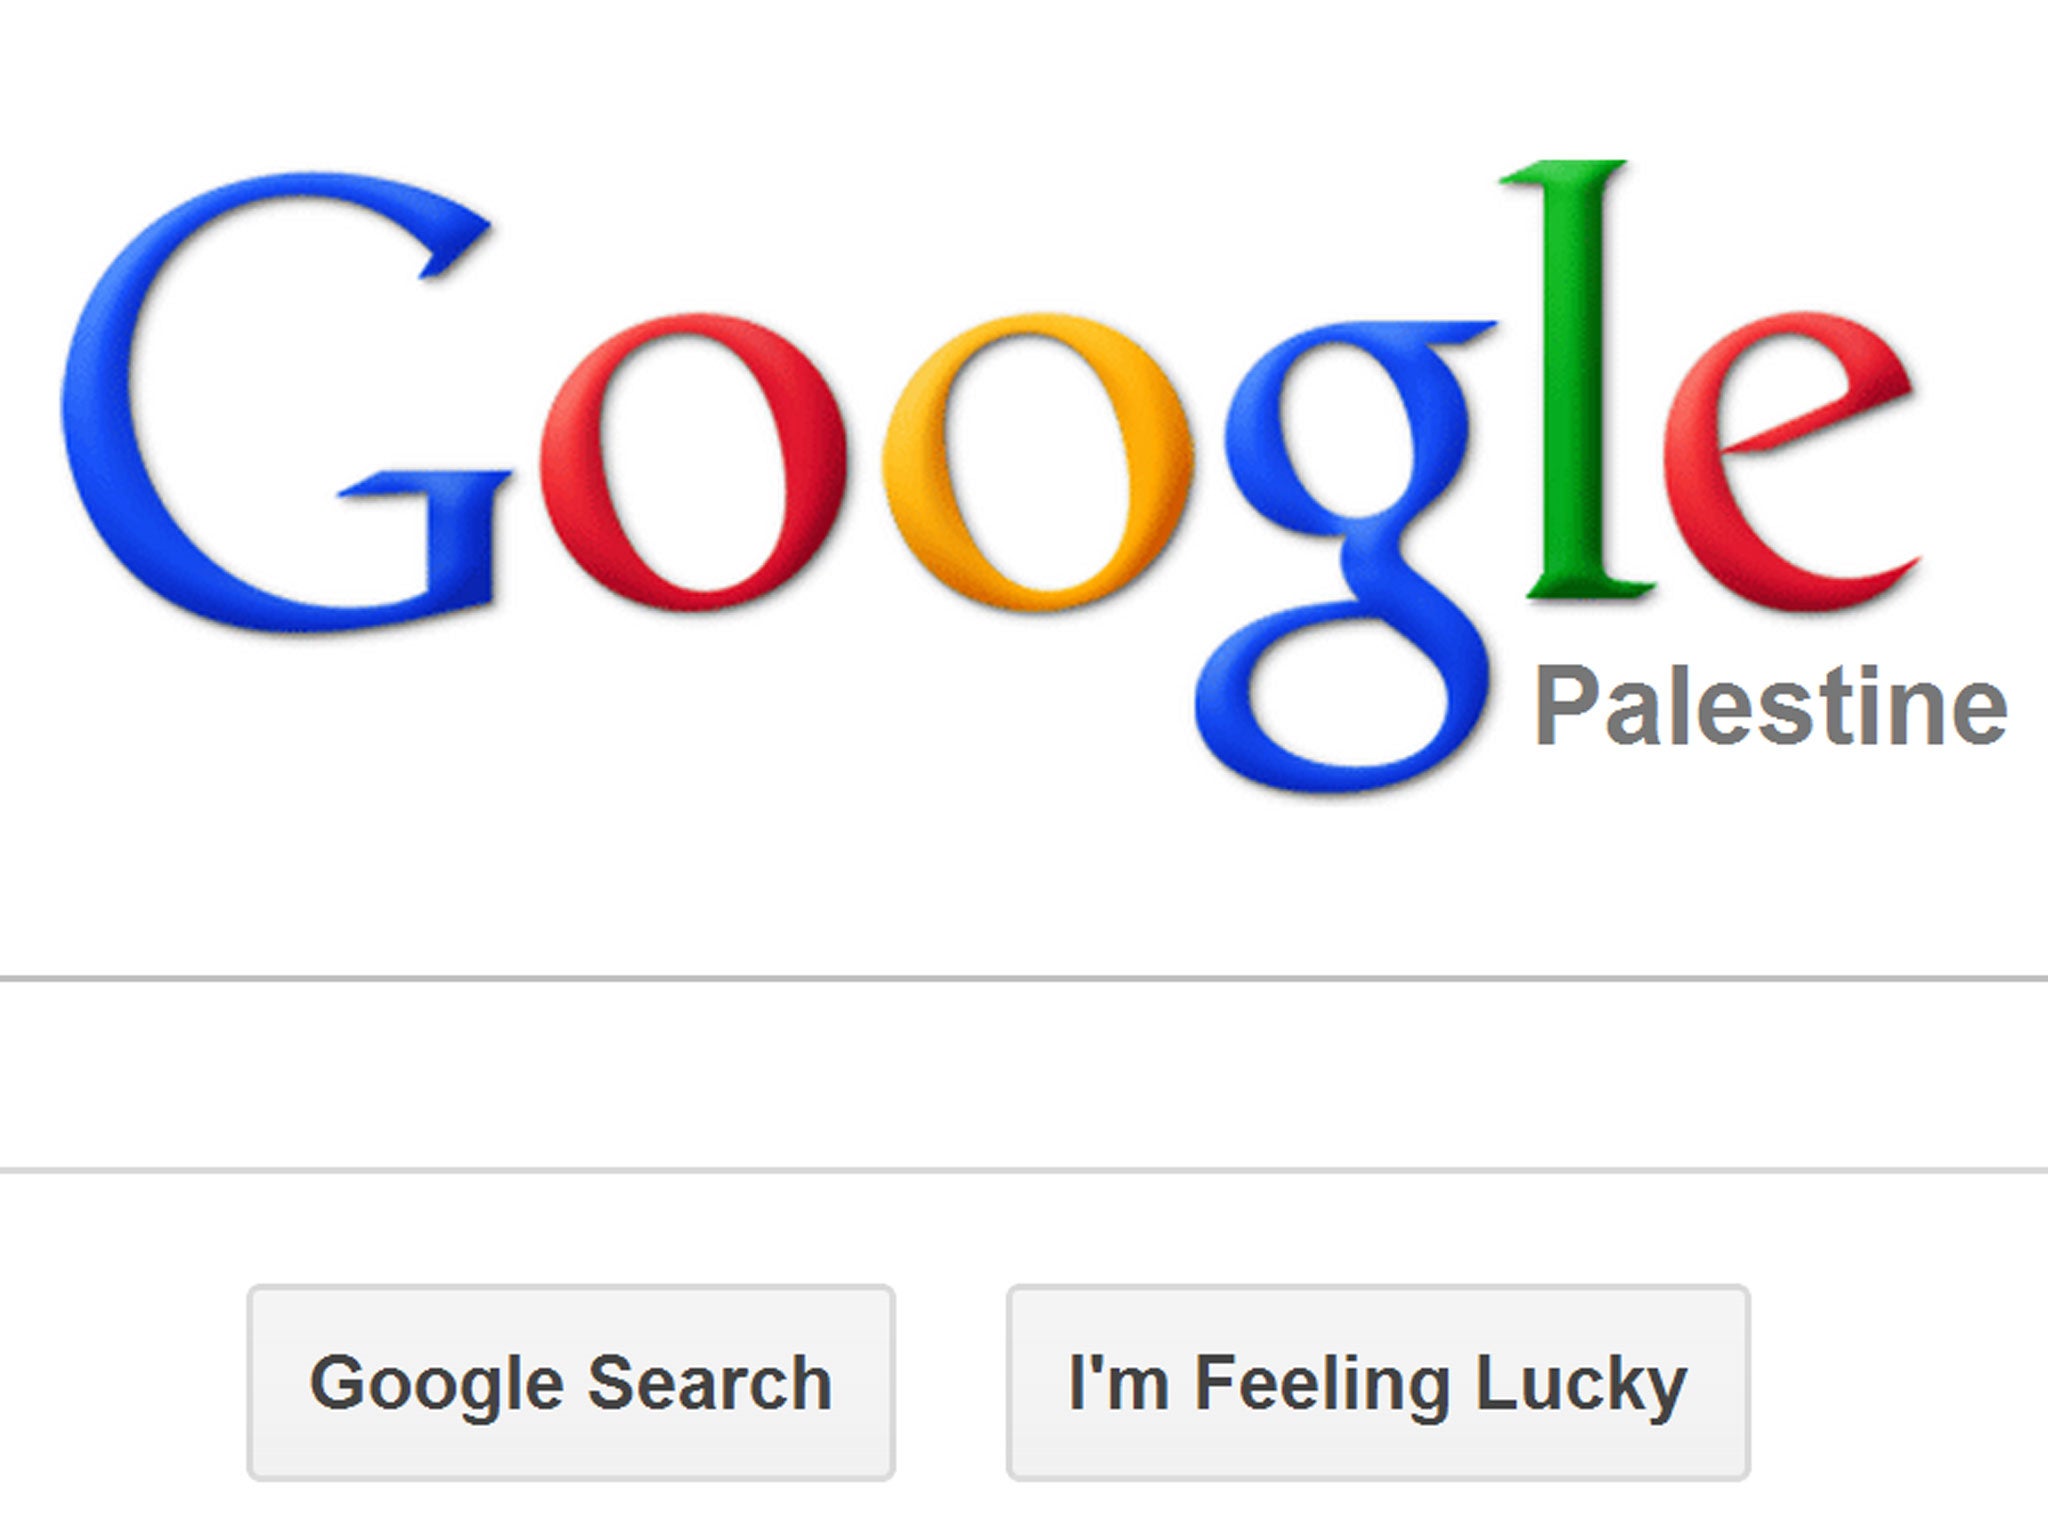 Google has changed the designation on its Palestinian site from "Palestinian Territories" to "Palestine"